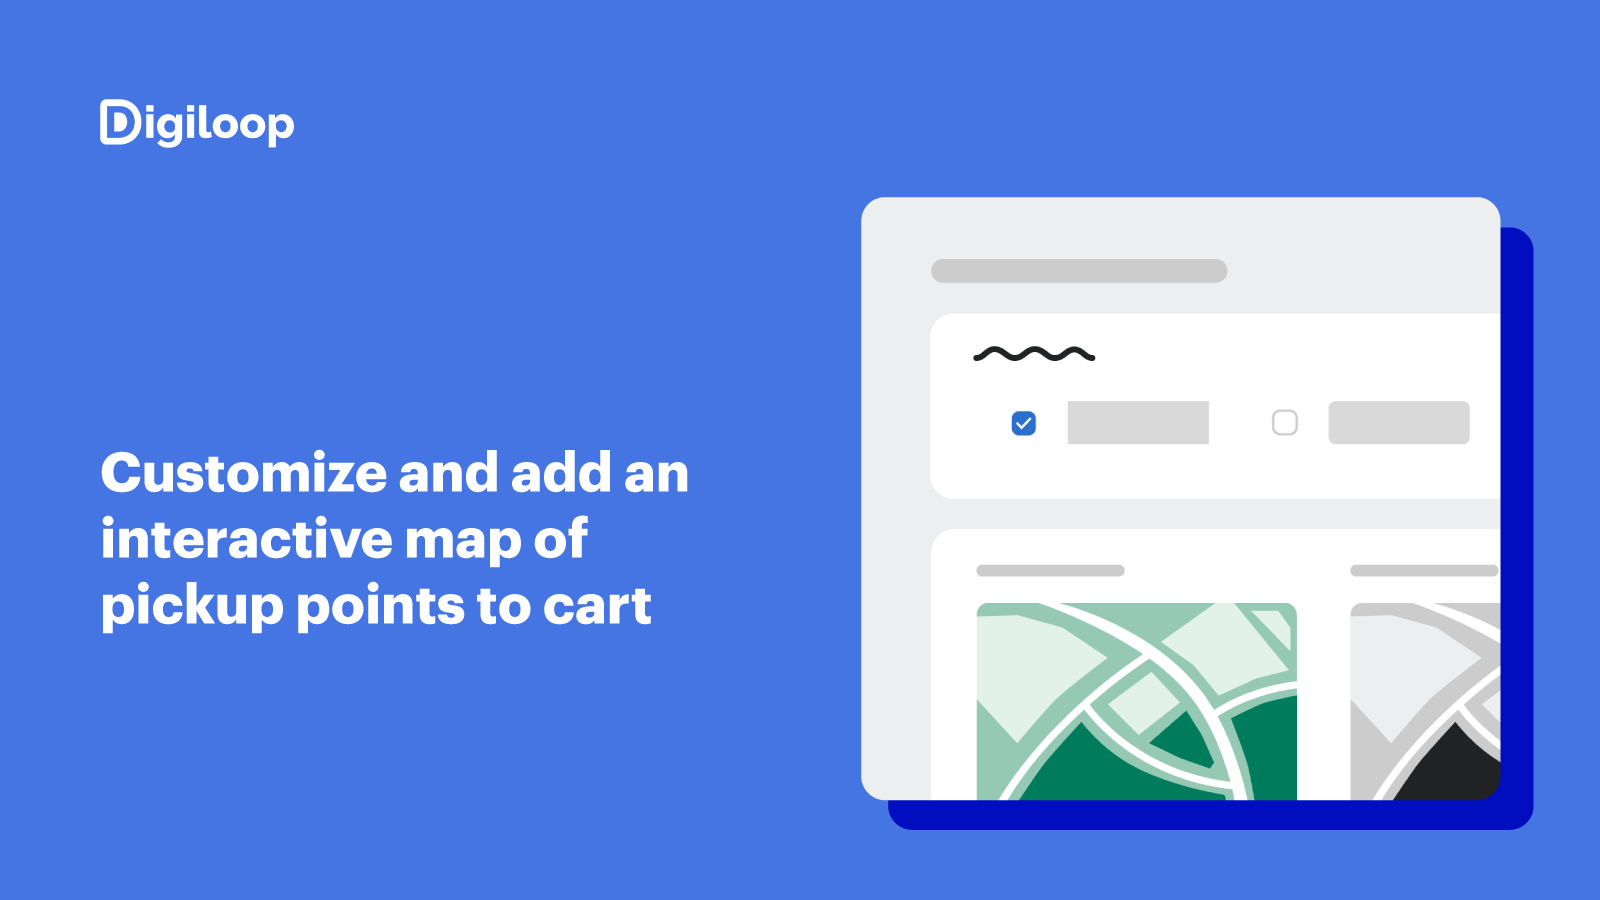 Customize and add an interactive map of pickup points to cart